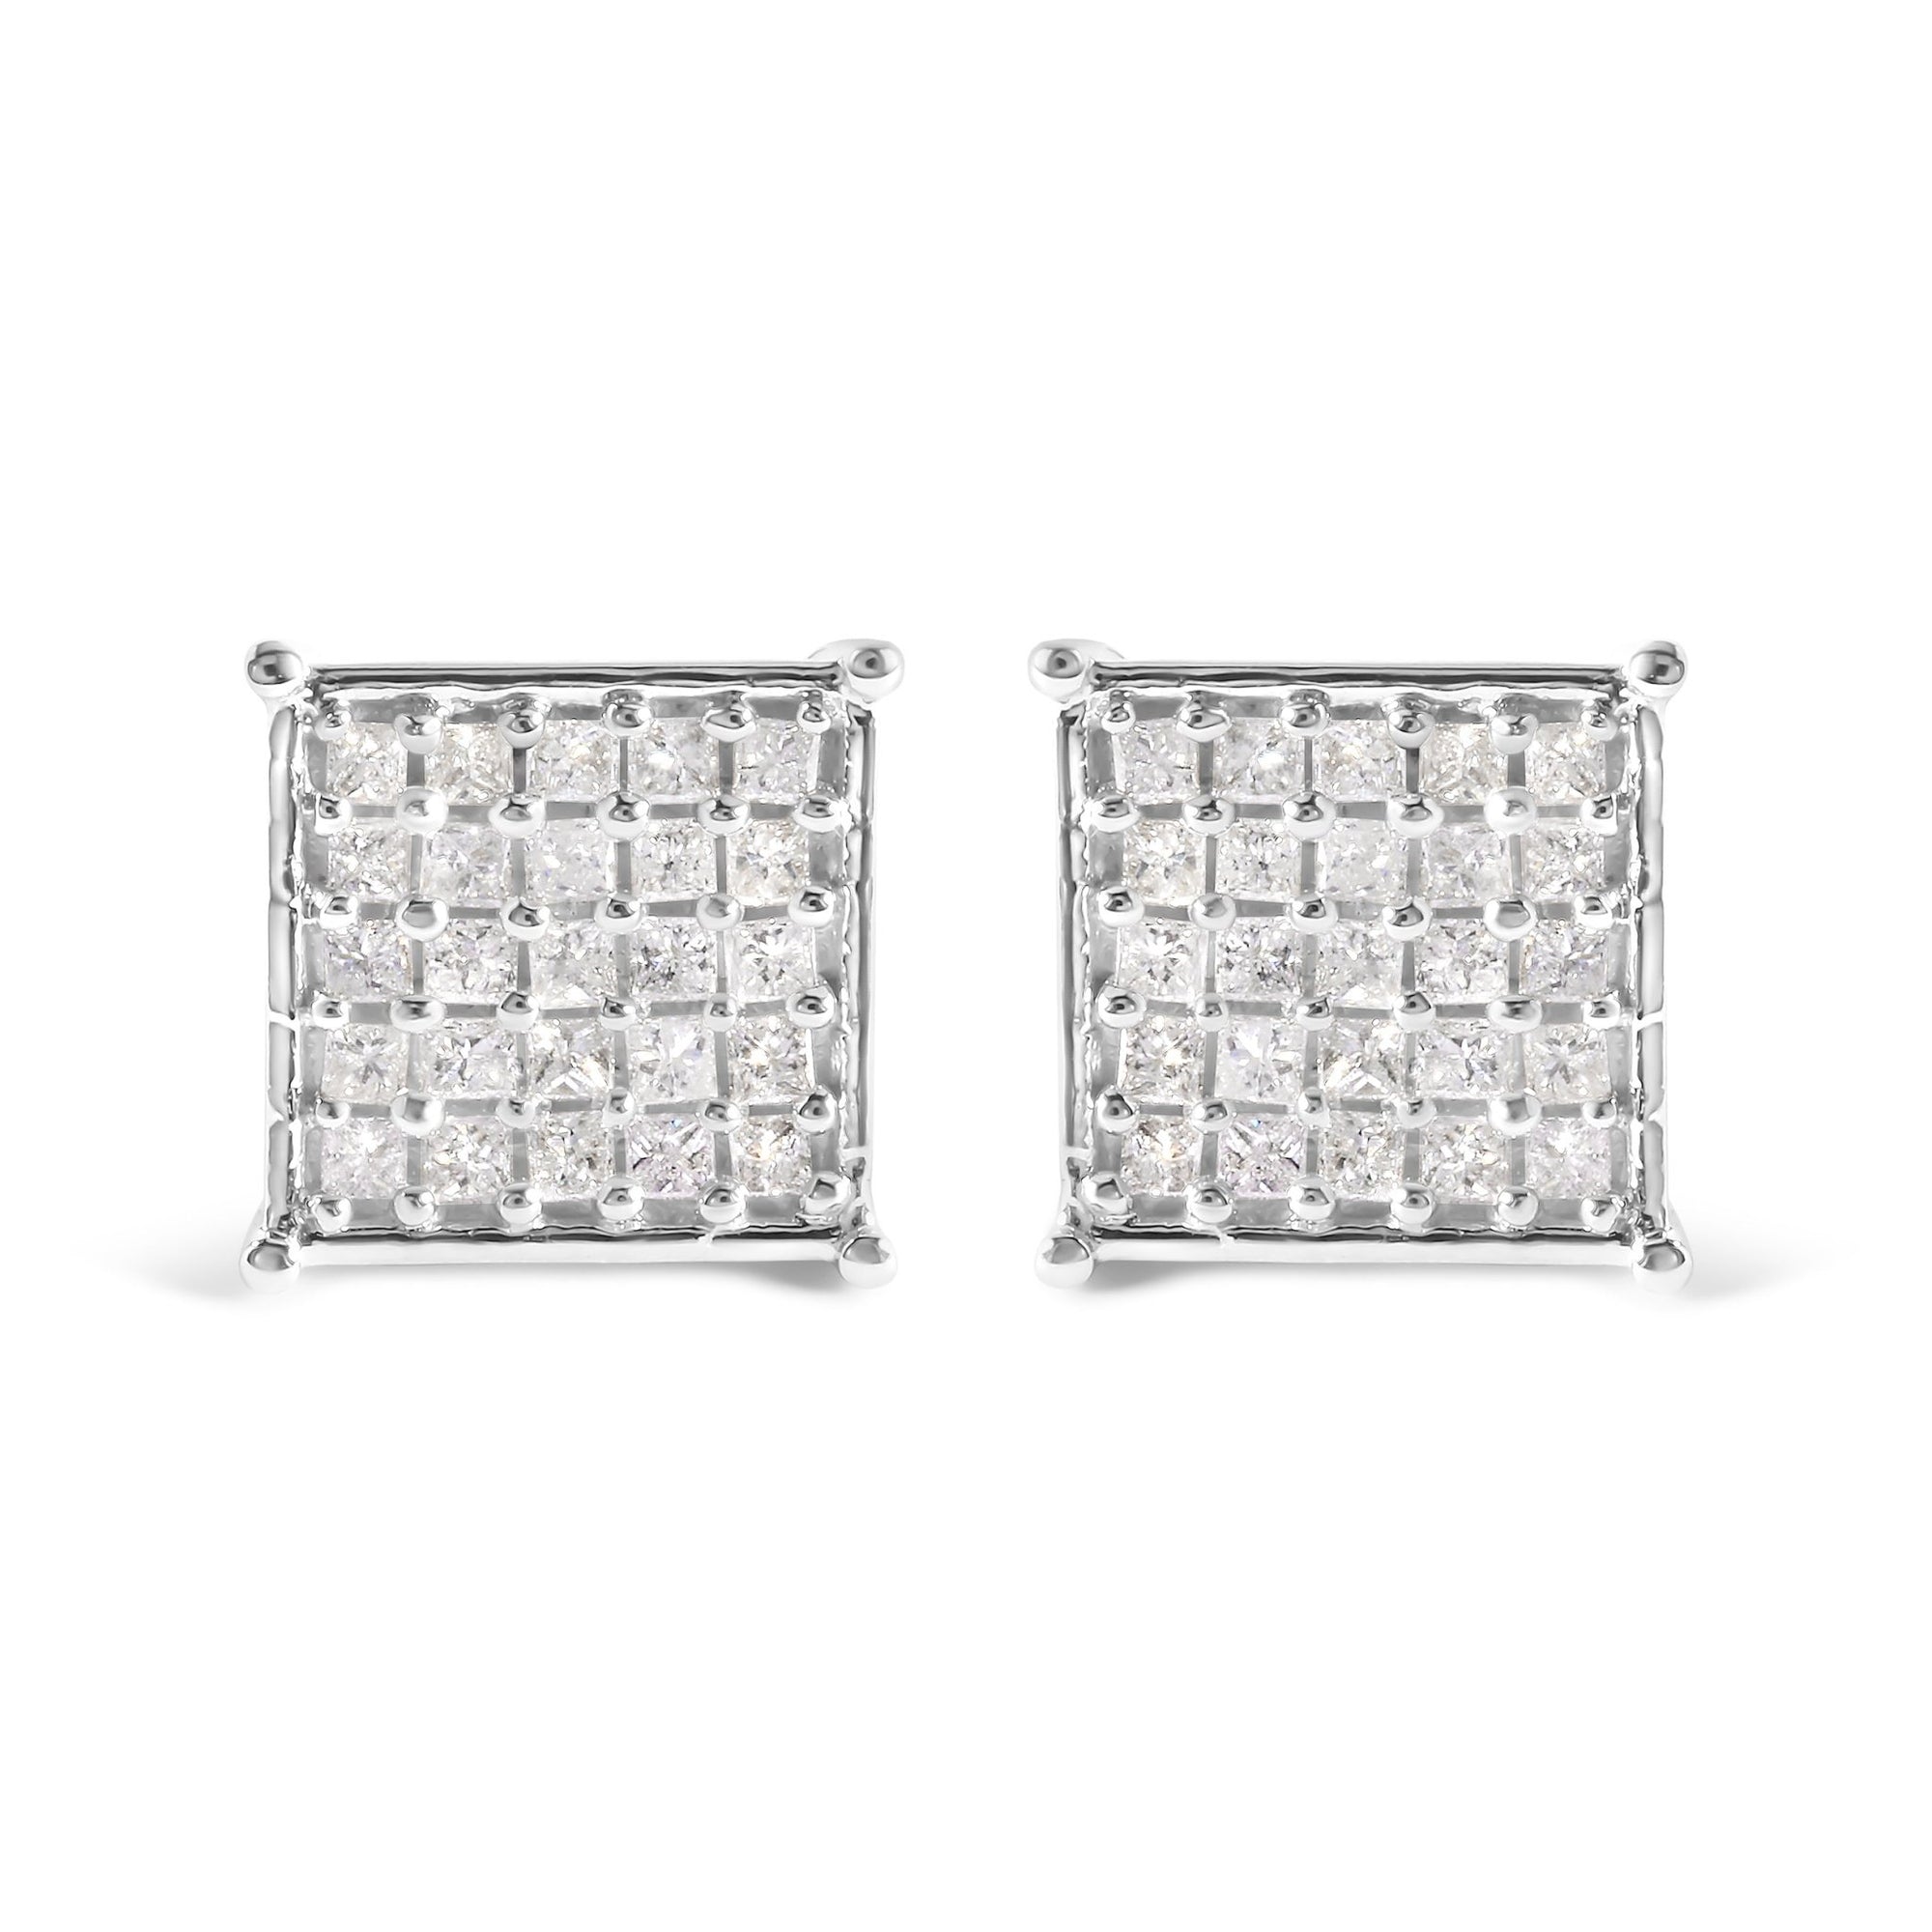 10K White Gold 3/4 Cttw Princess Diamond Composite Stud Earrings (I-J Color, I1-I2 Clarity) - LinkagejewelrydesignLinkagejewelrydesign